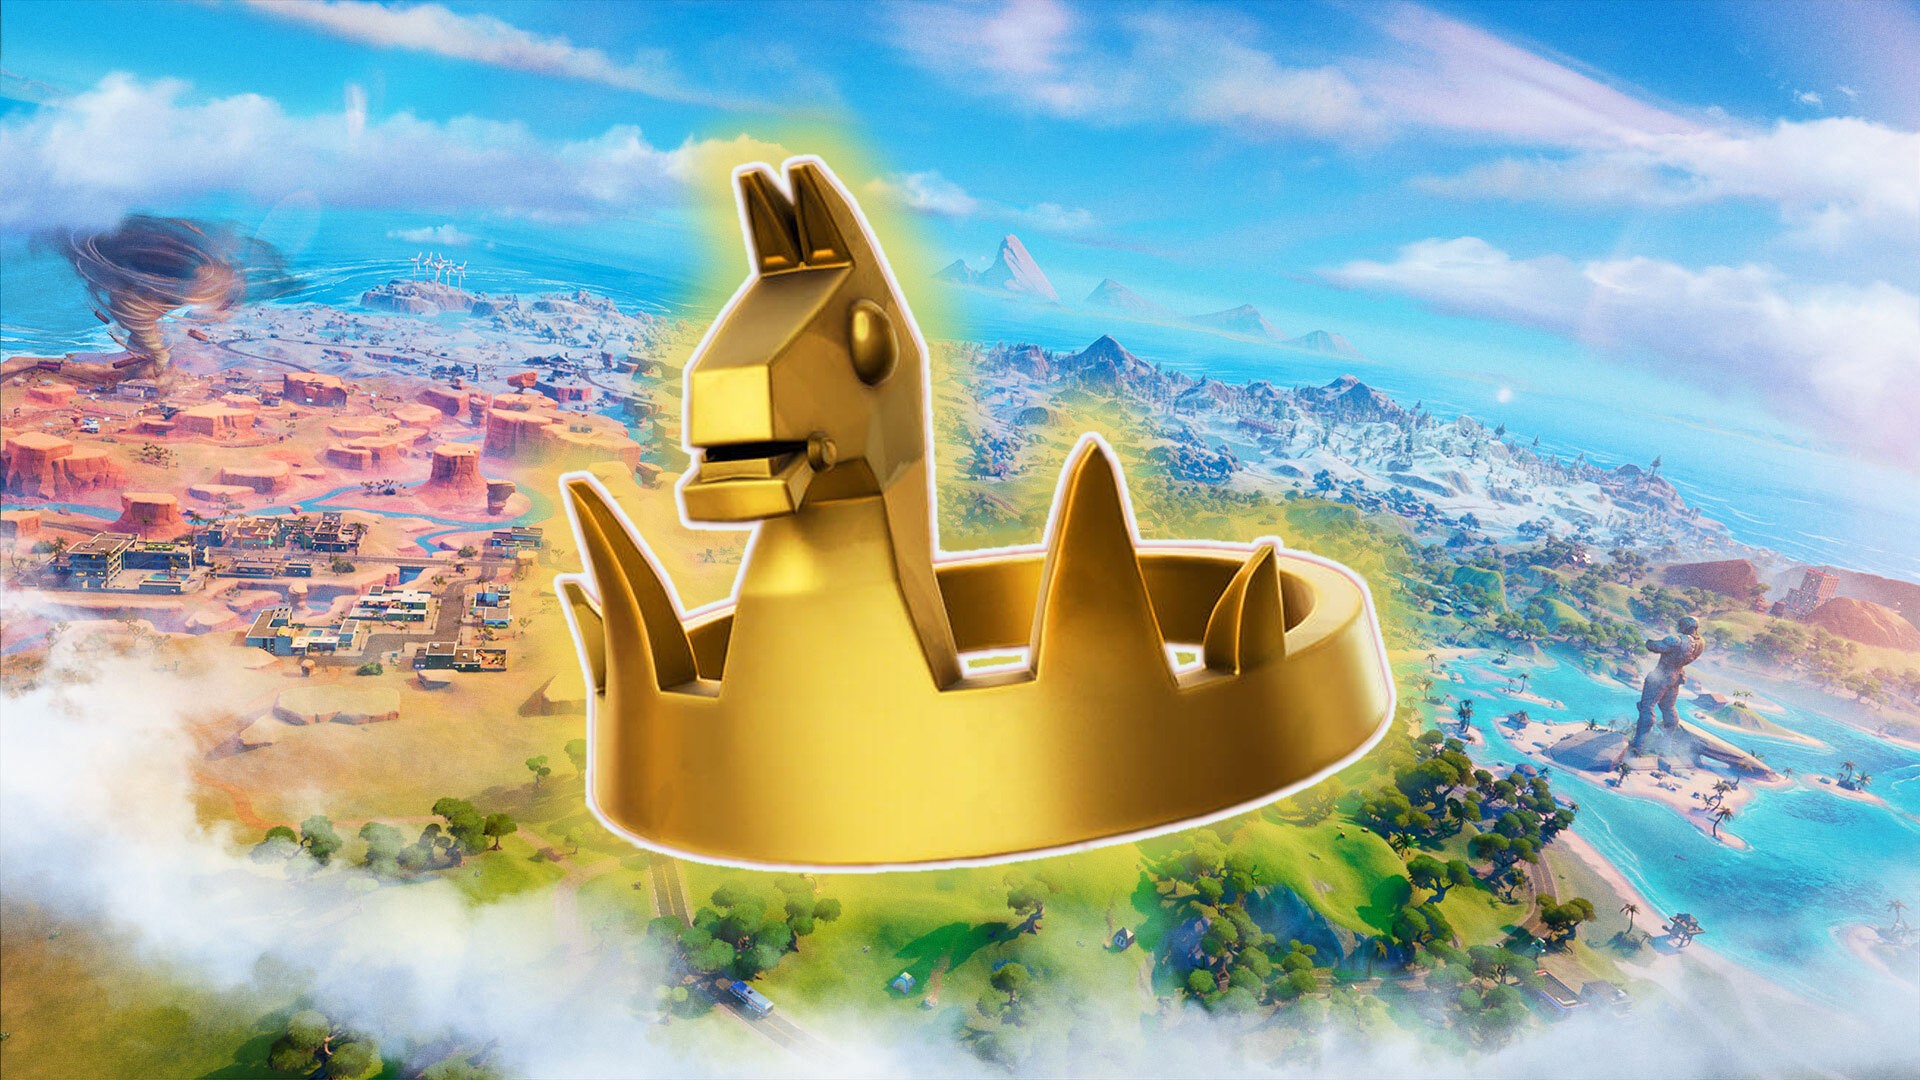 How to get the victory crown emote in fortnite